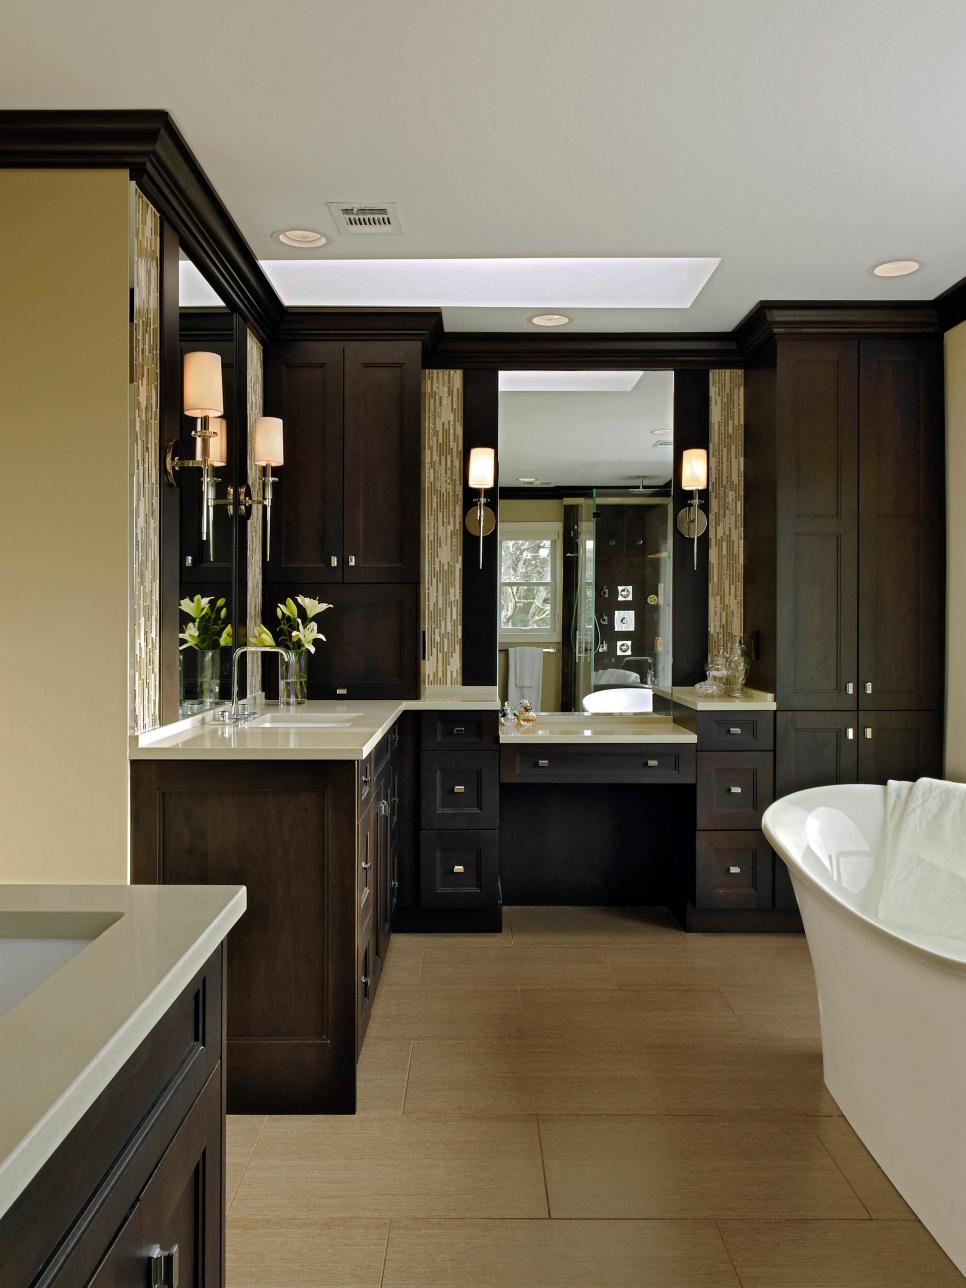 Spacious Bathroom With Wooden Cabinets and a Freestanding Tub